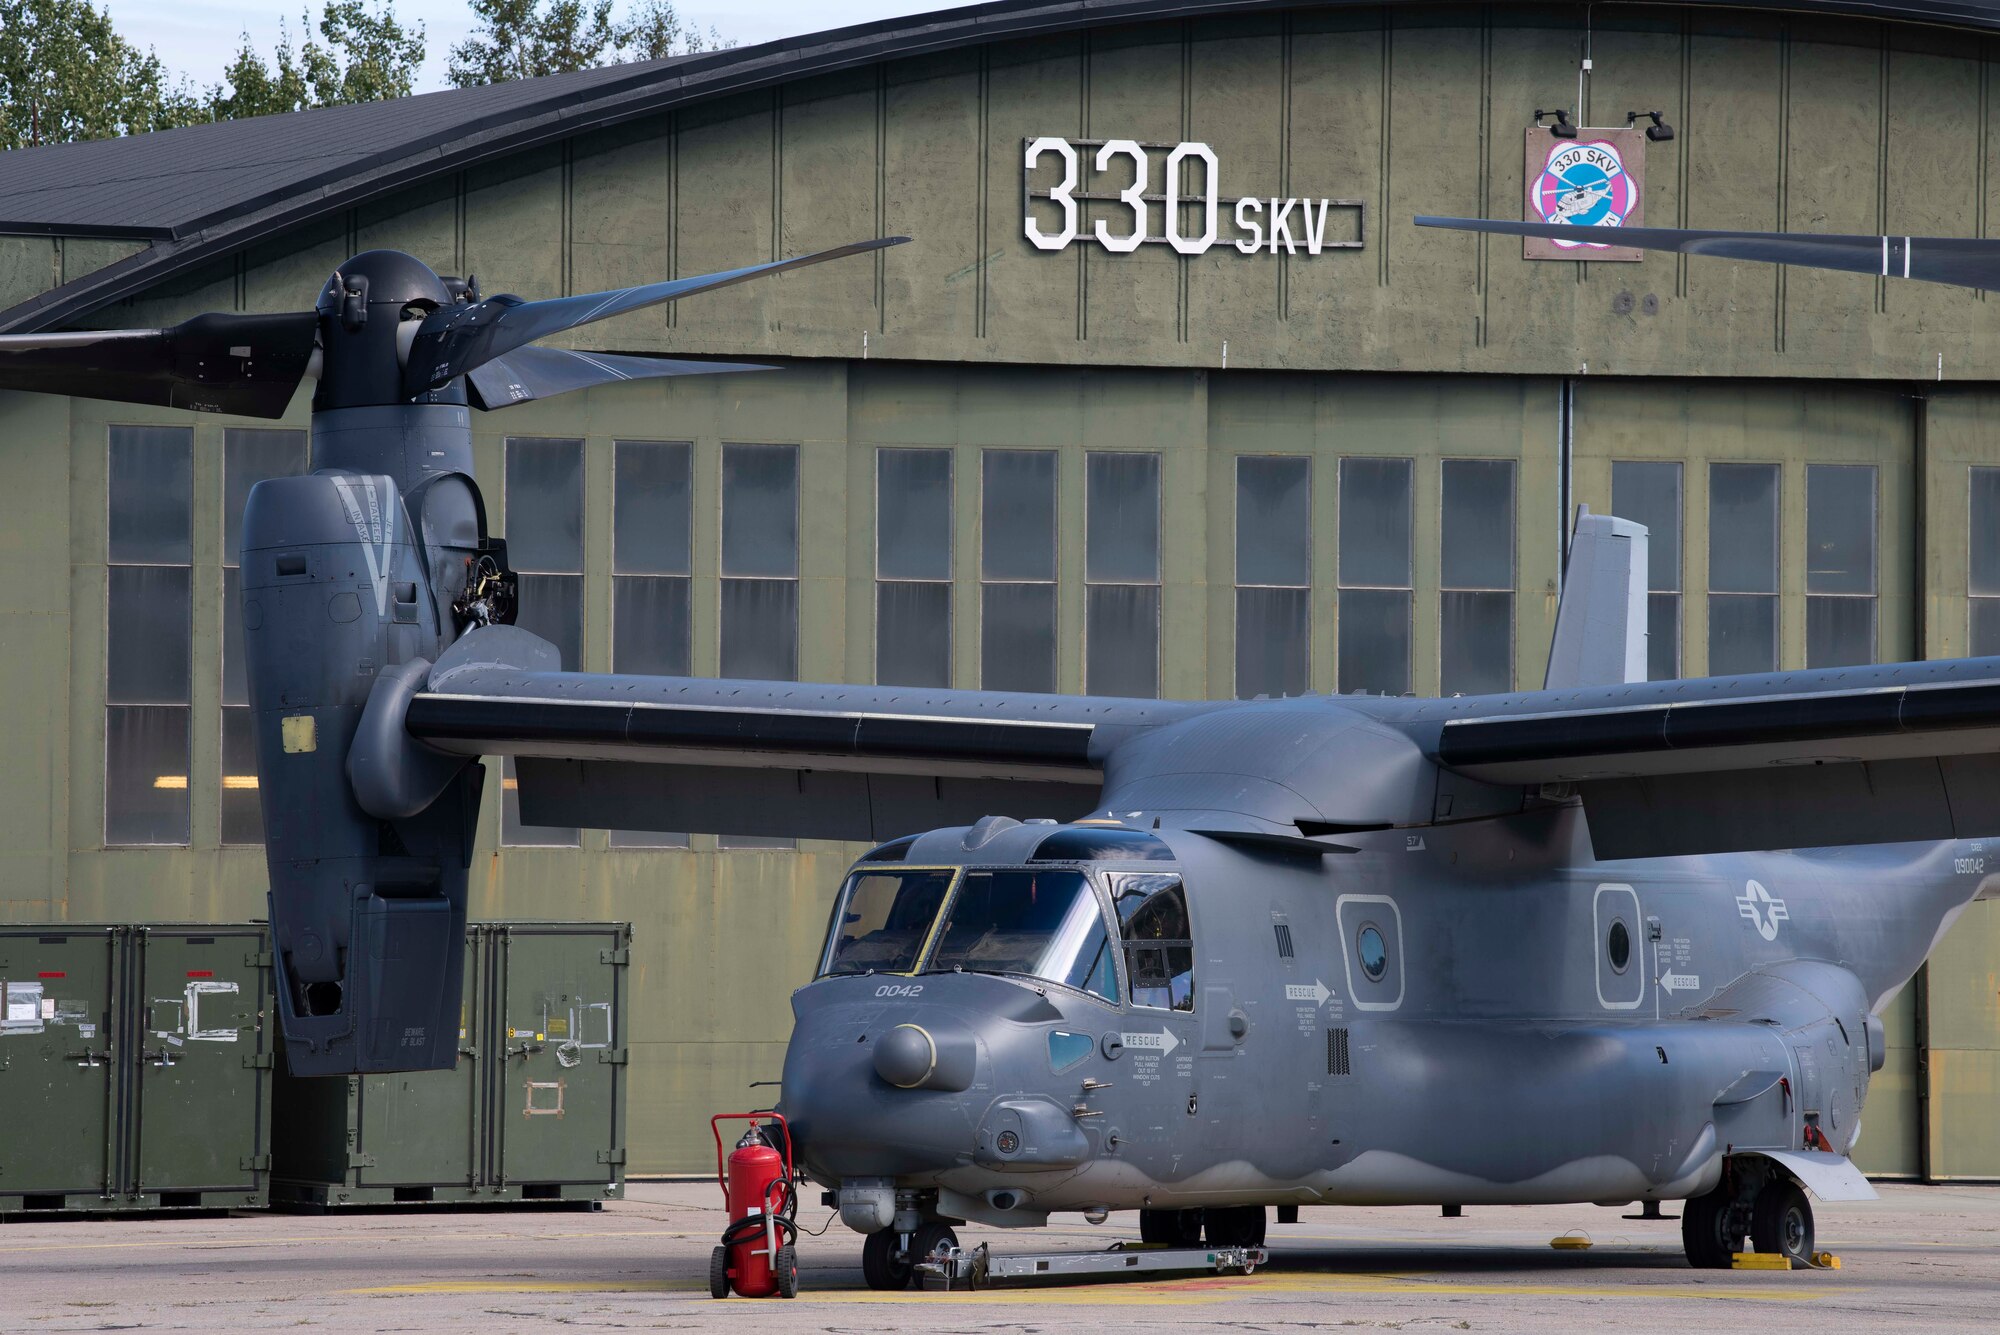 A CV-22B Osprey, based out of RAF Mildenhall, U.K., sits parked on the flightline outside a Norwe-gian hangar at Rygge Air Station, during a training mission, August 25, 2020. Integration with the Norwegian Air Force allowed the 352d Special Operations Wing to enhance and strengthen bonds with our partner nation and further secure the strategic high-north region. The exercise provided training for 352d Special Operations Wing members on capabilities such as personnel recovery, forward area refuel-ing point, aerial refueling, maritime craft delivery system, and fast rope training. (U.S. Air Force photo by Staff Sgt. Michael Washburn)